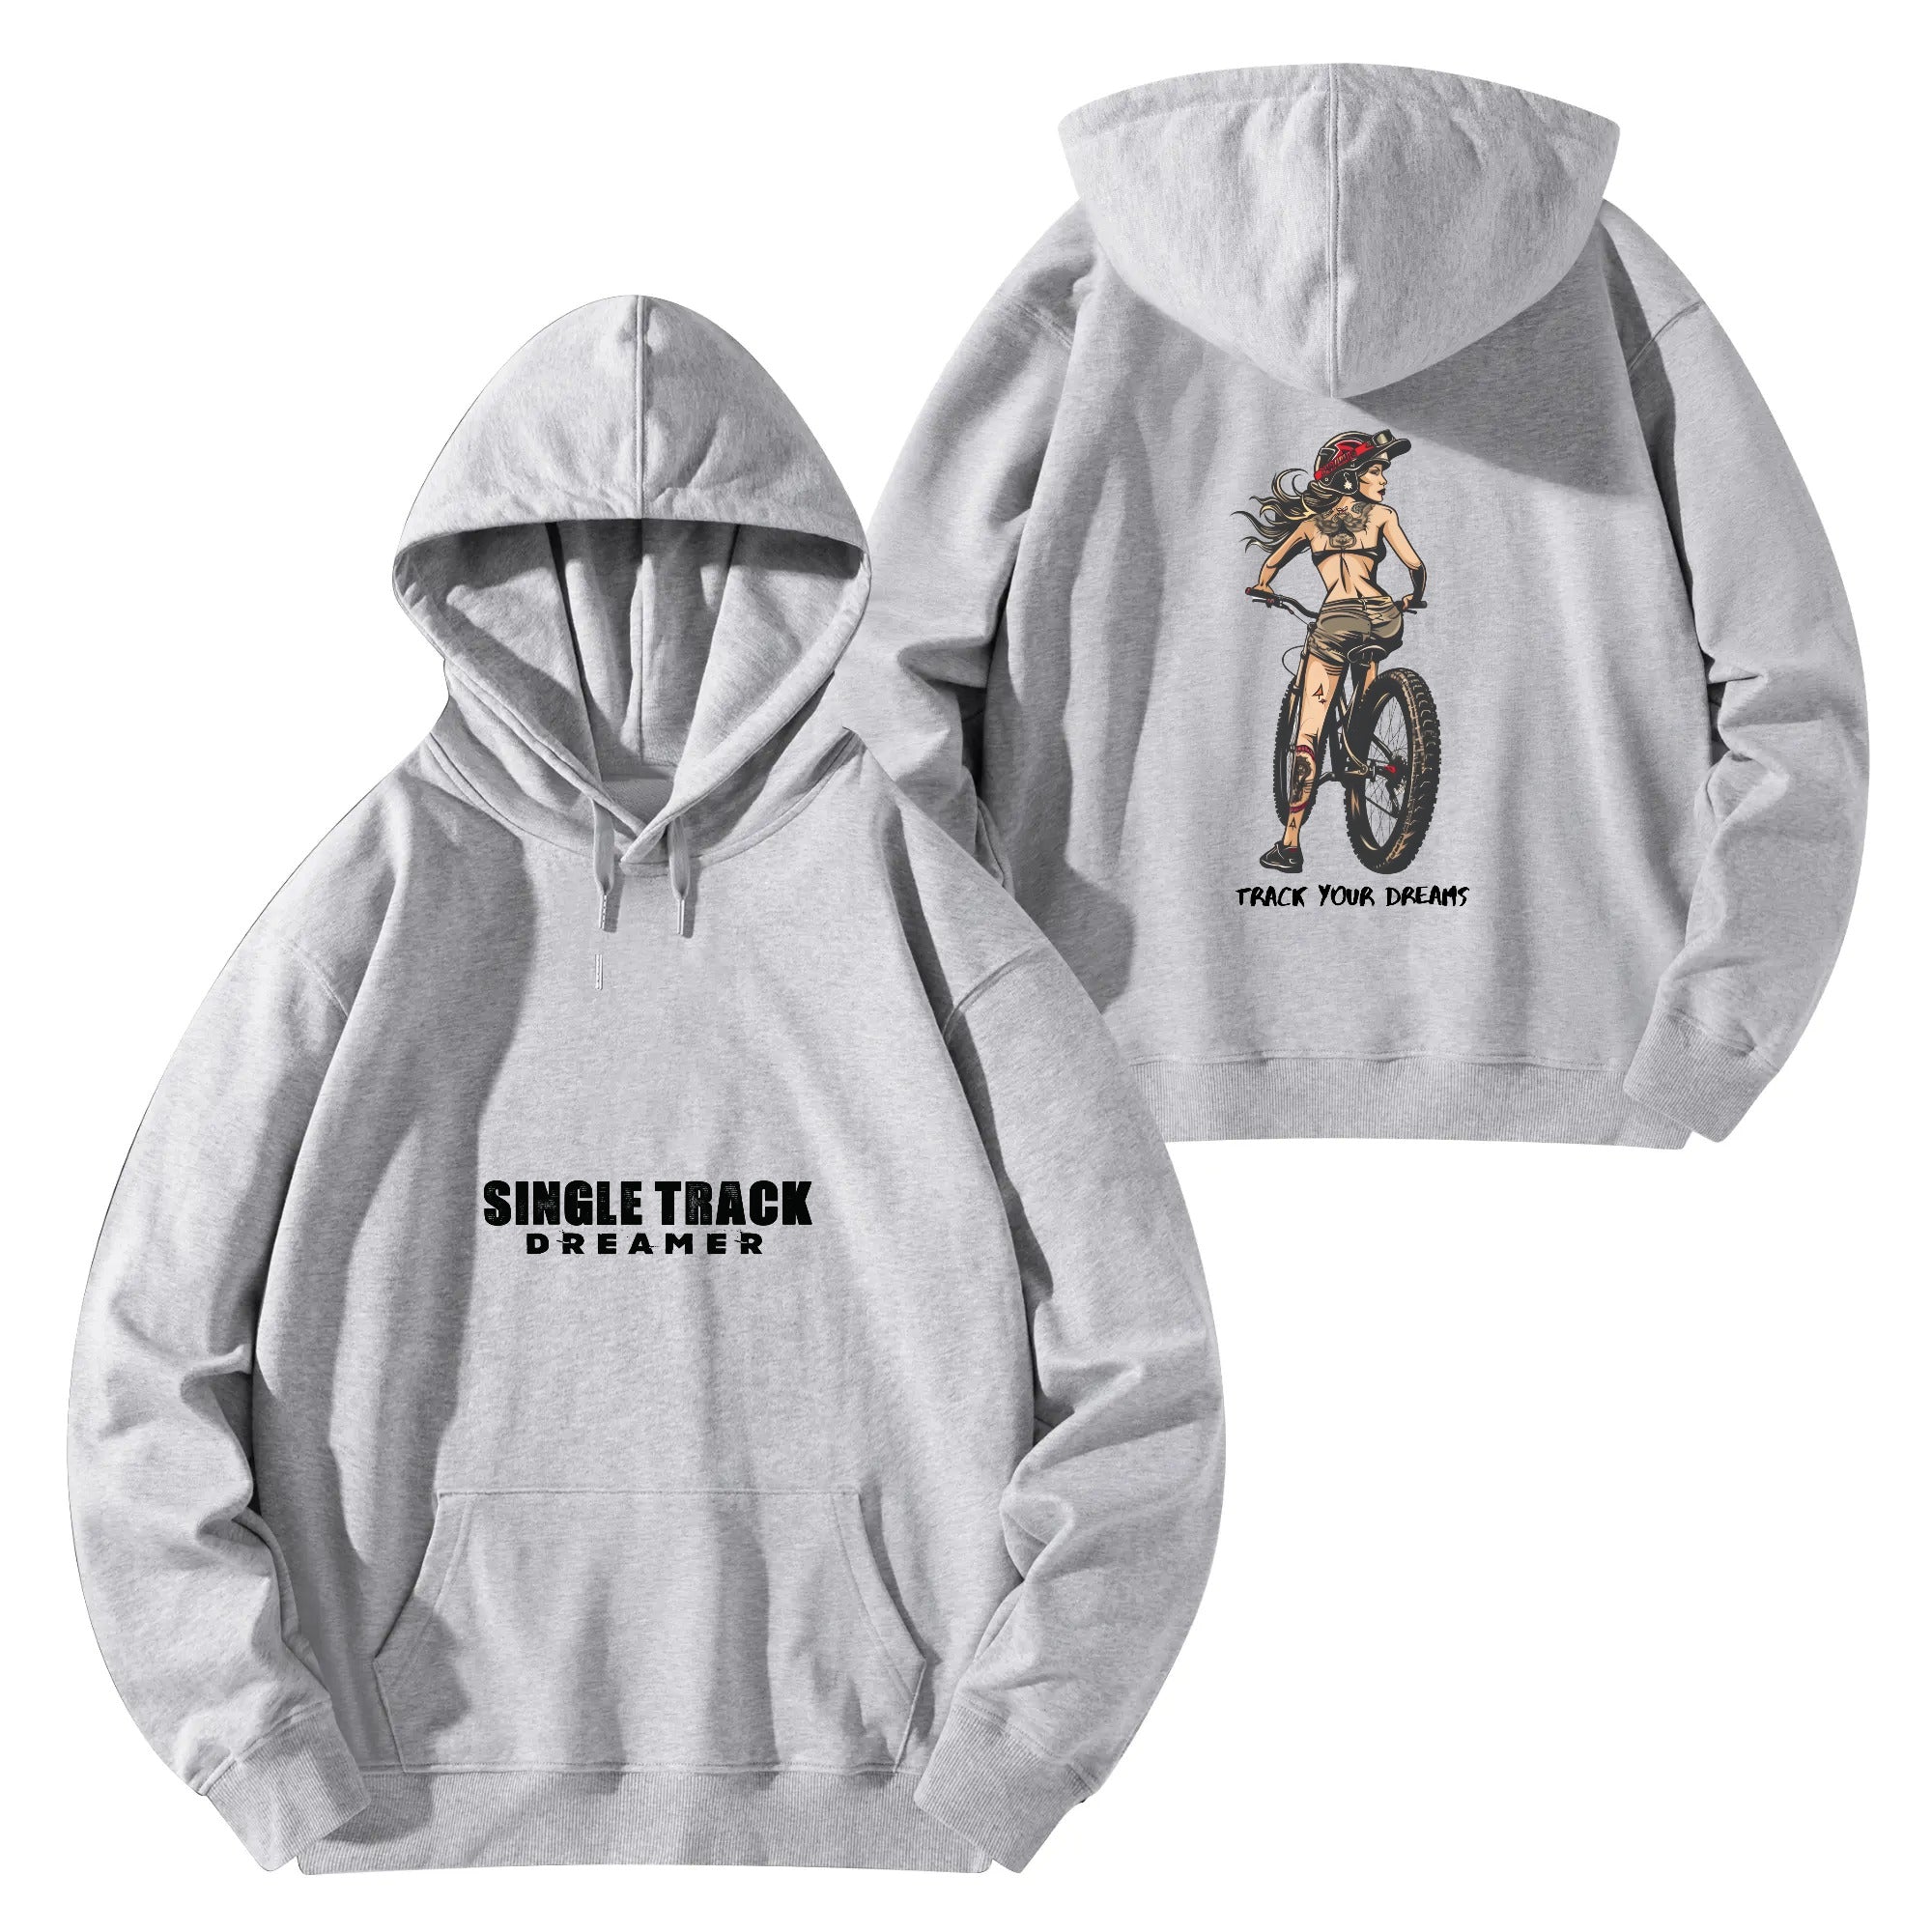 a grey hoodie with an image of a woman riding a bike